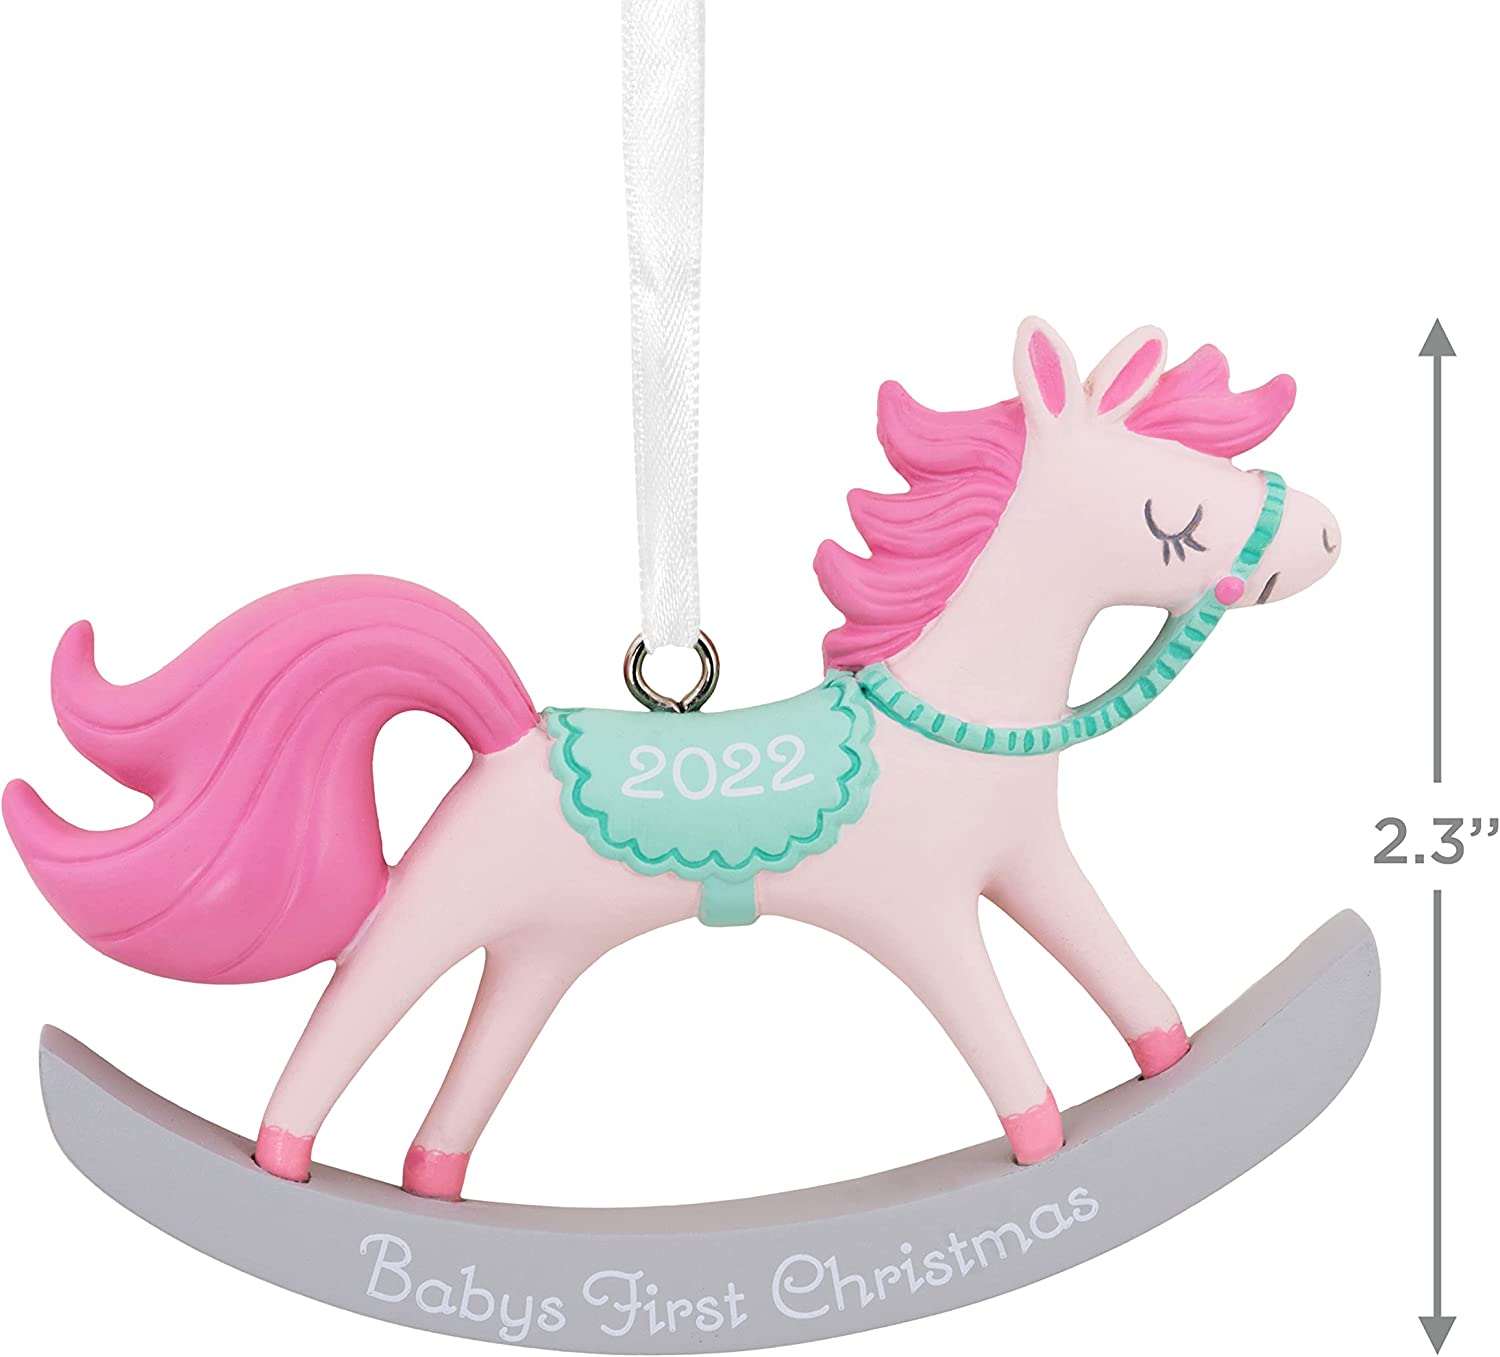 Baby Girl's First Christmas Dated 2022 Tree Trimmer Ornament